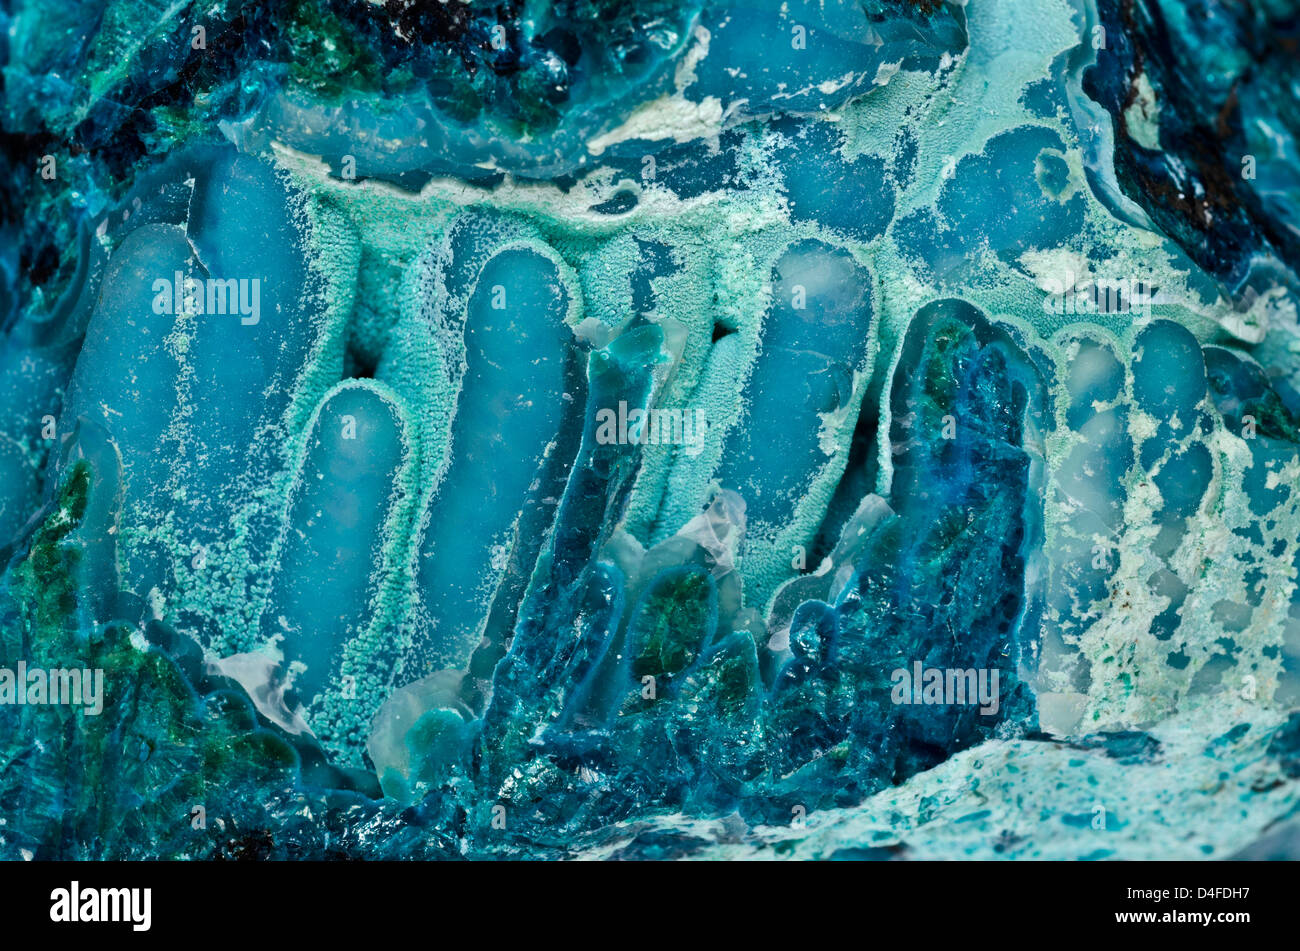 Geological specimen of green malachite mineral crystals Stock Photo